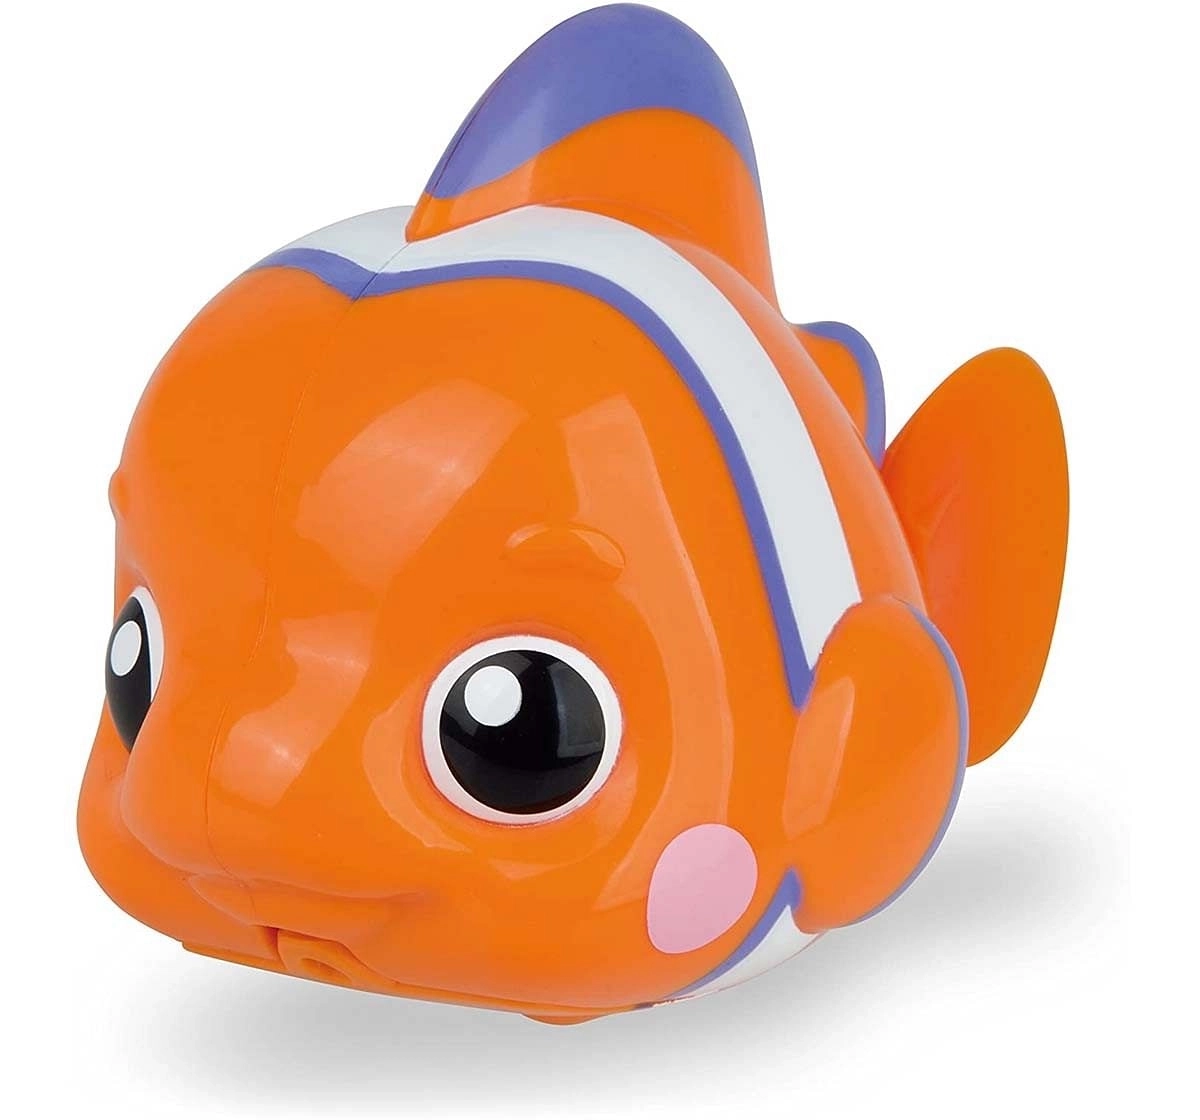 Robo Alive Junior Little Fish Battery-Powered Bath Toy & Accessories for Kids age 18M + 